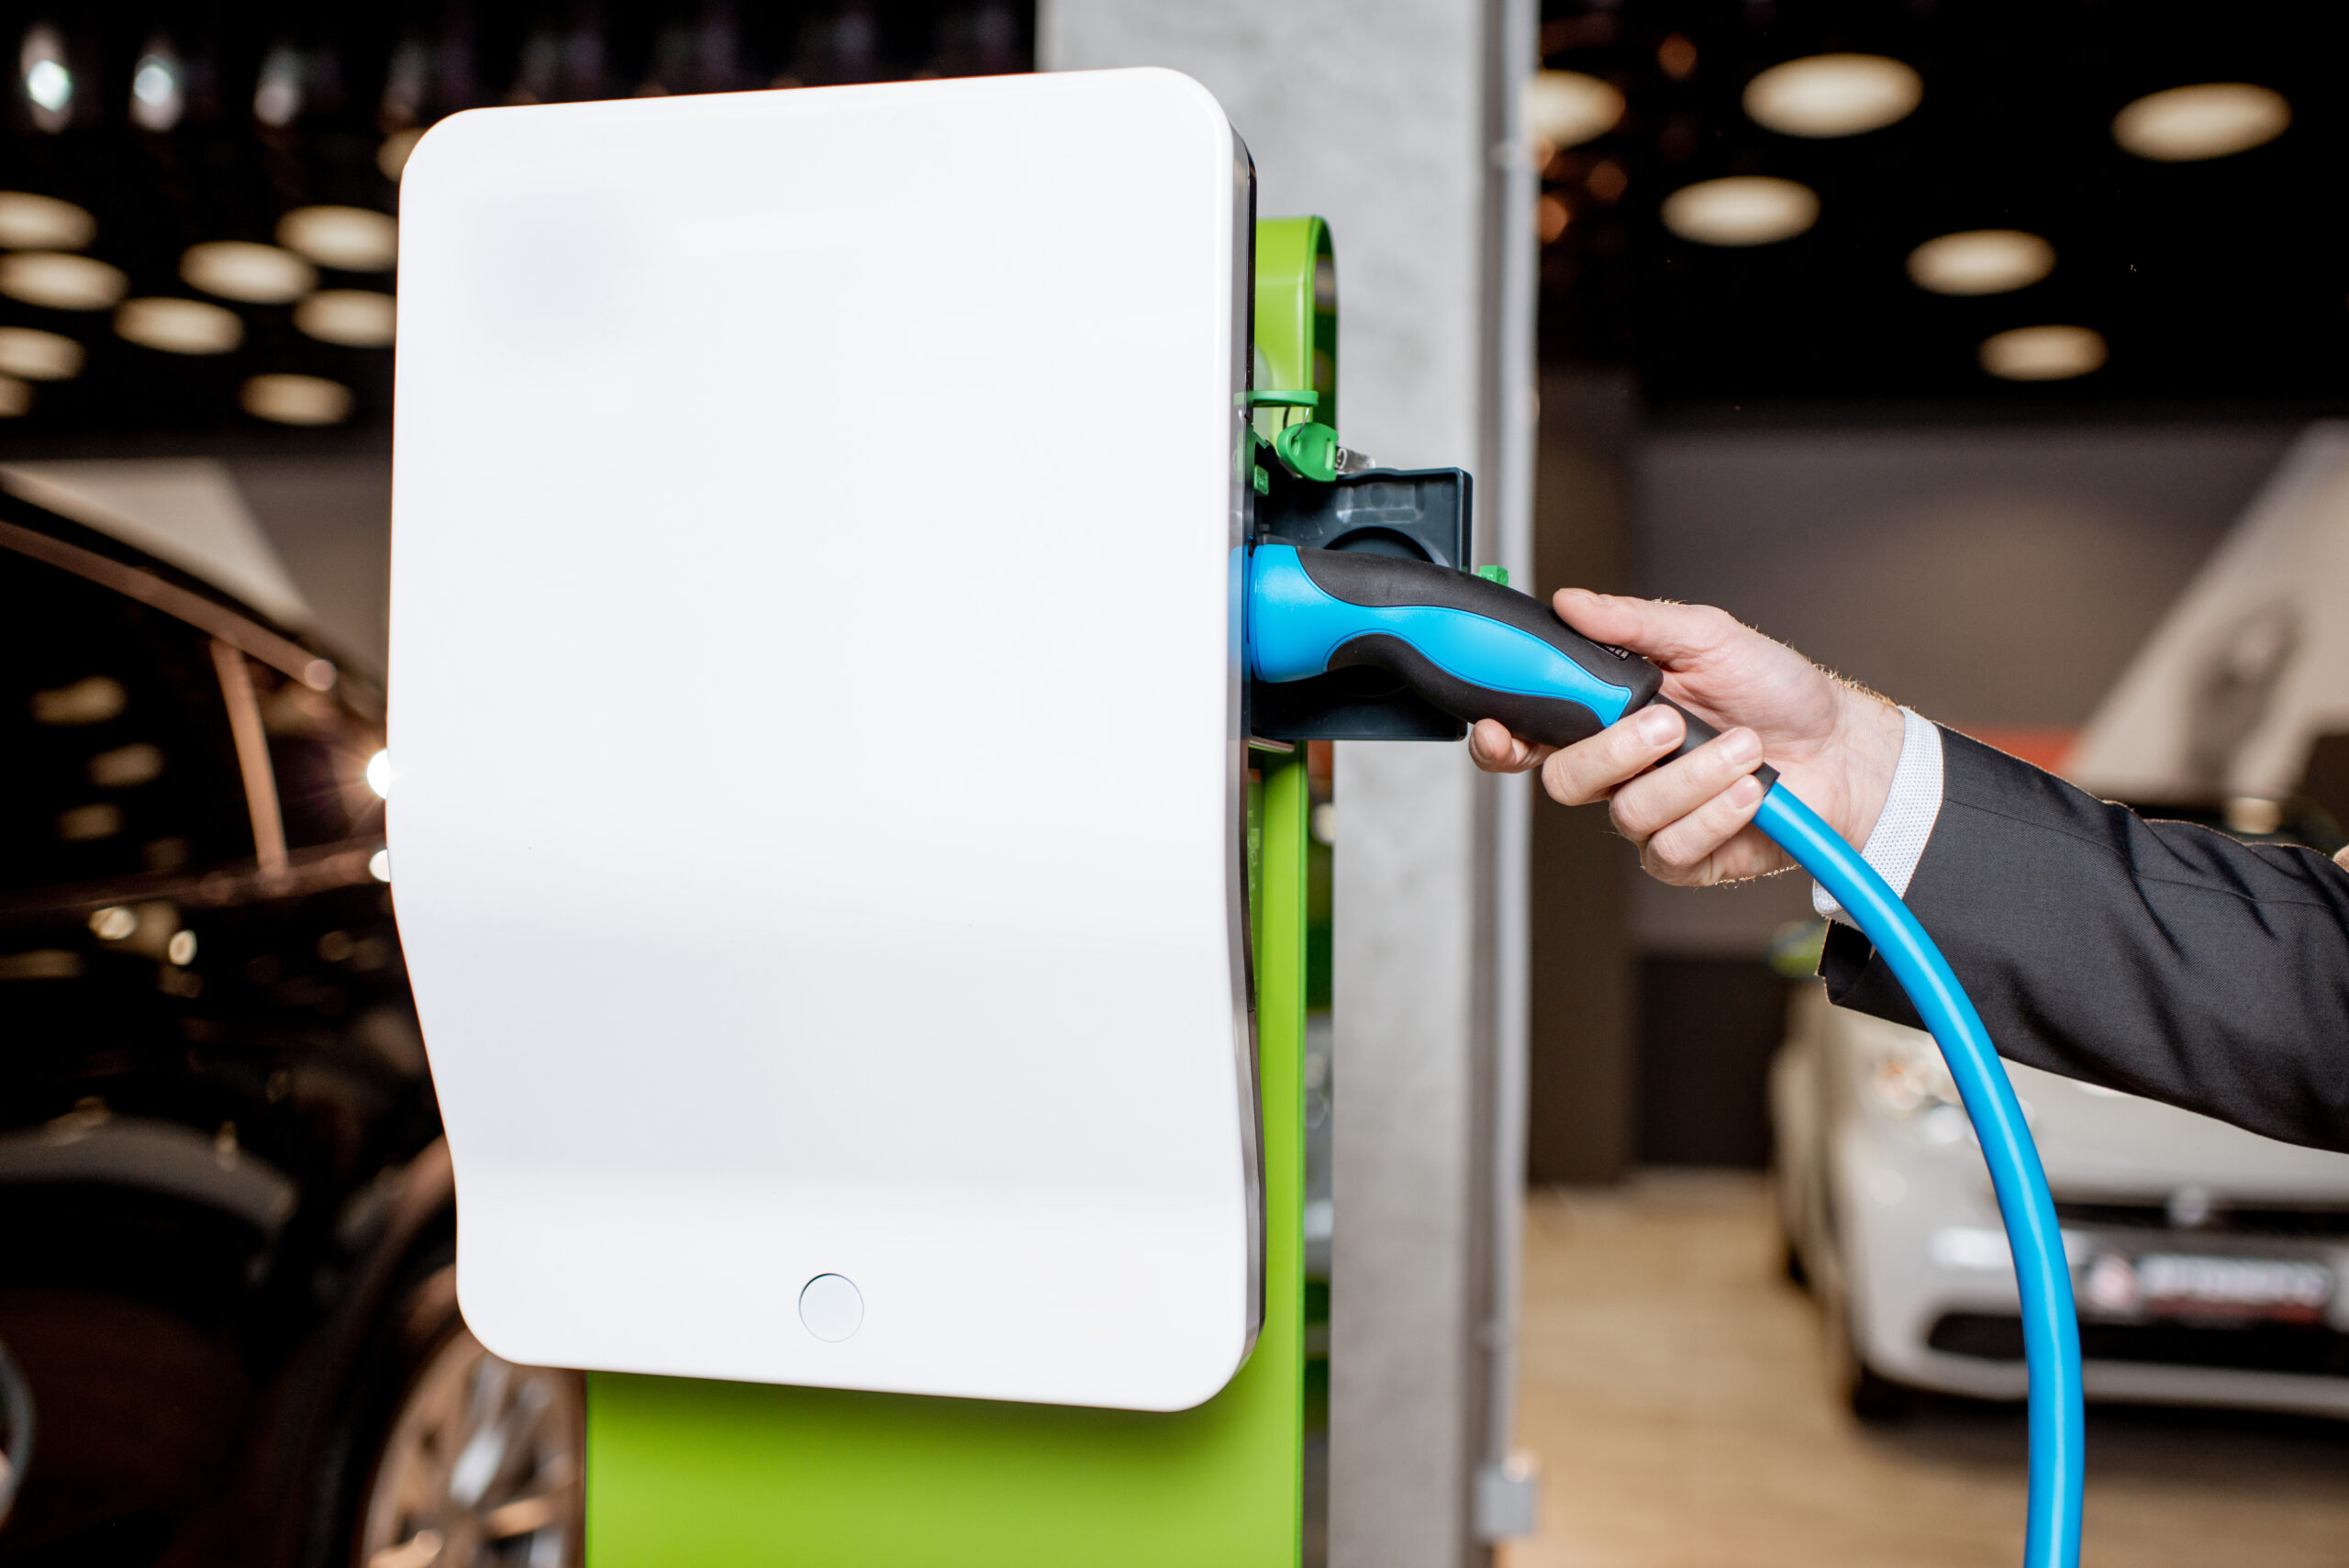 Man plugging cable into the charging station for electric cars at the car dealership, close-up view